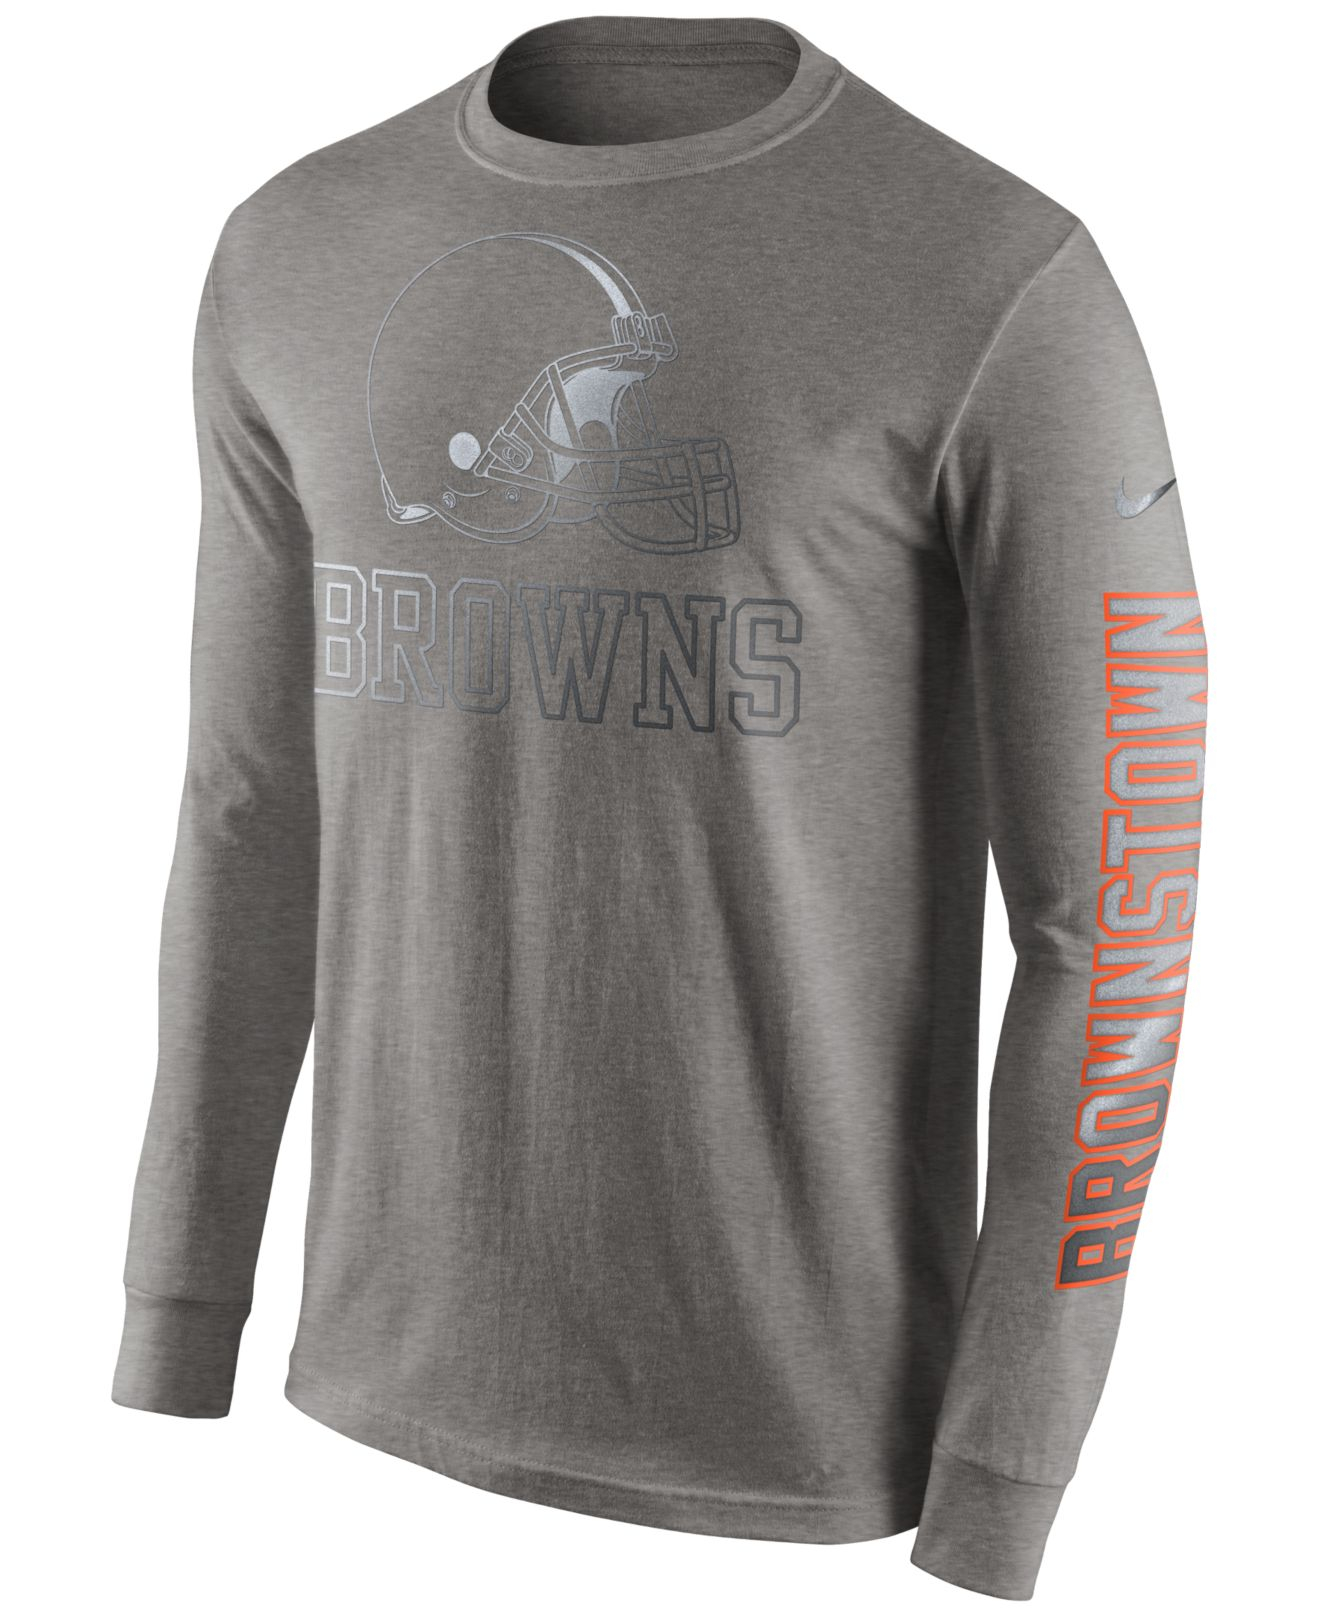 Lyst - Nike Men's Long-sleeve Cleveland Browns Reflective T-shirt in ...